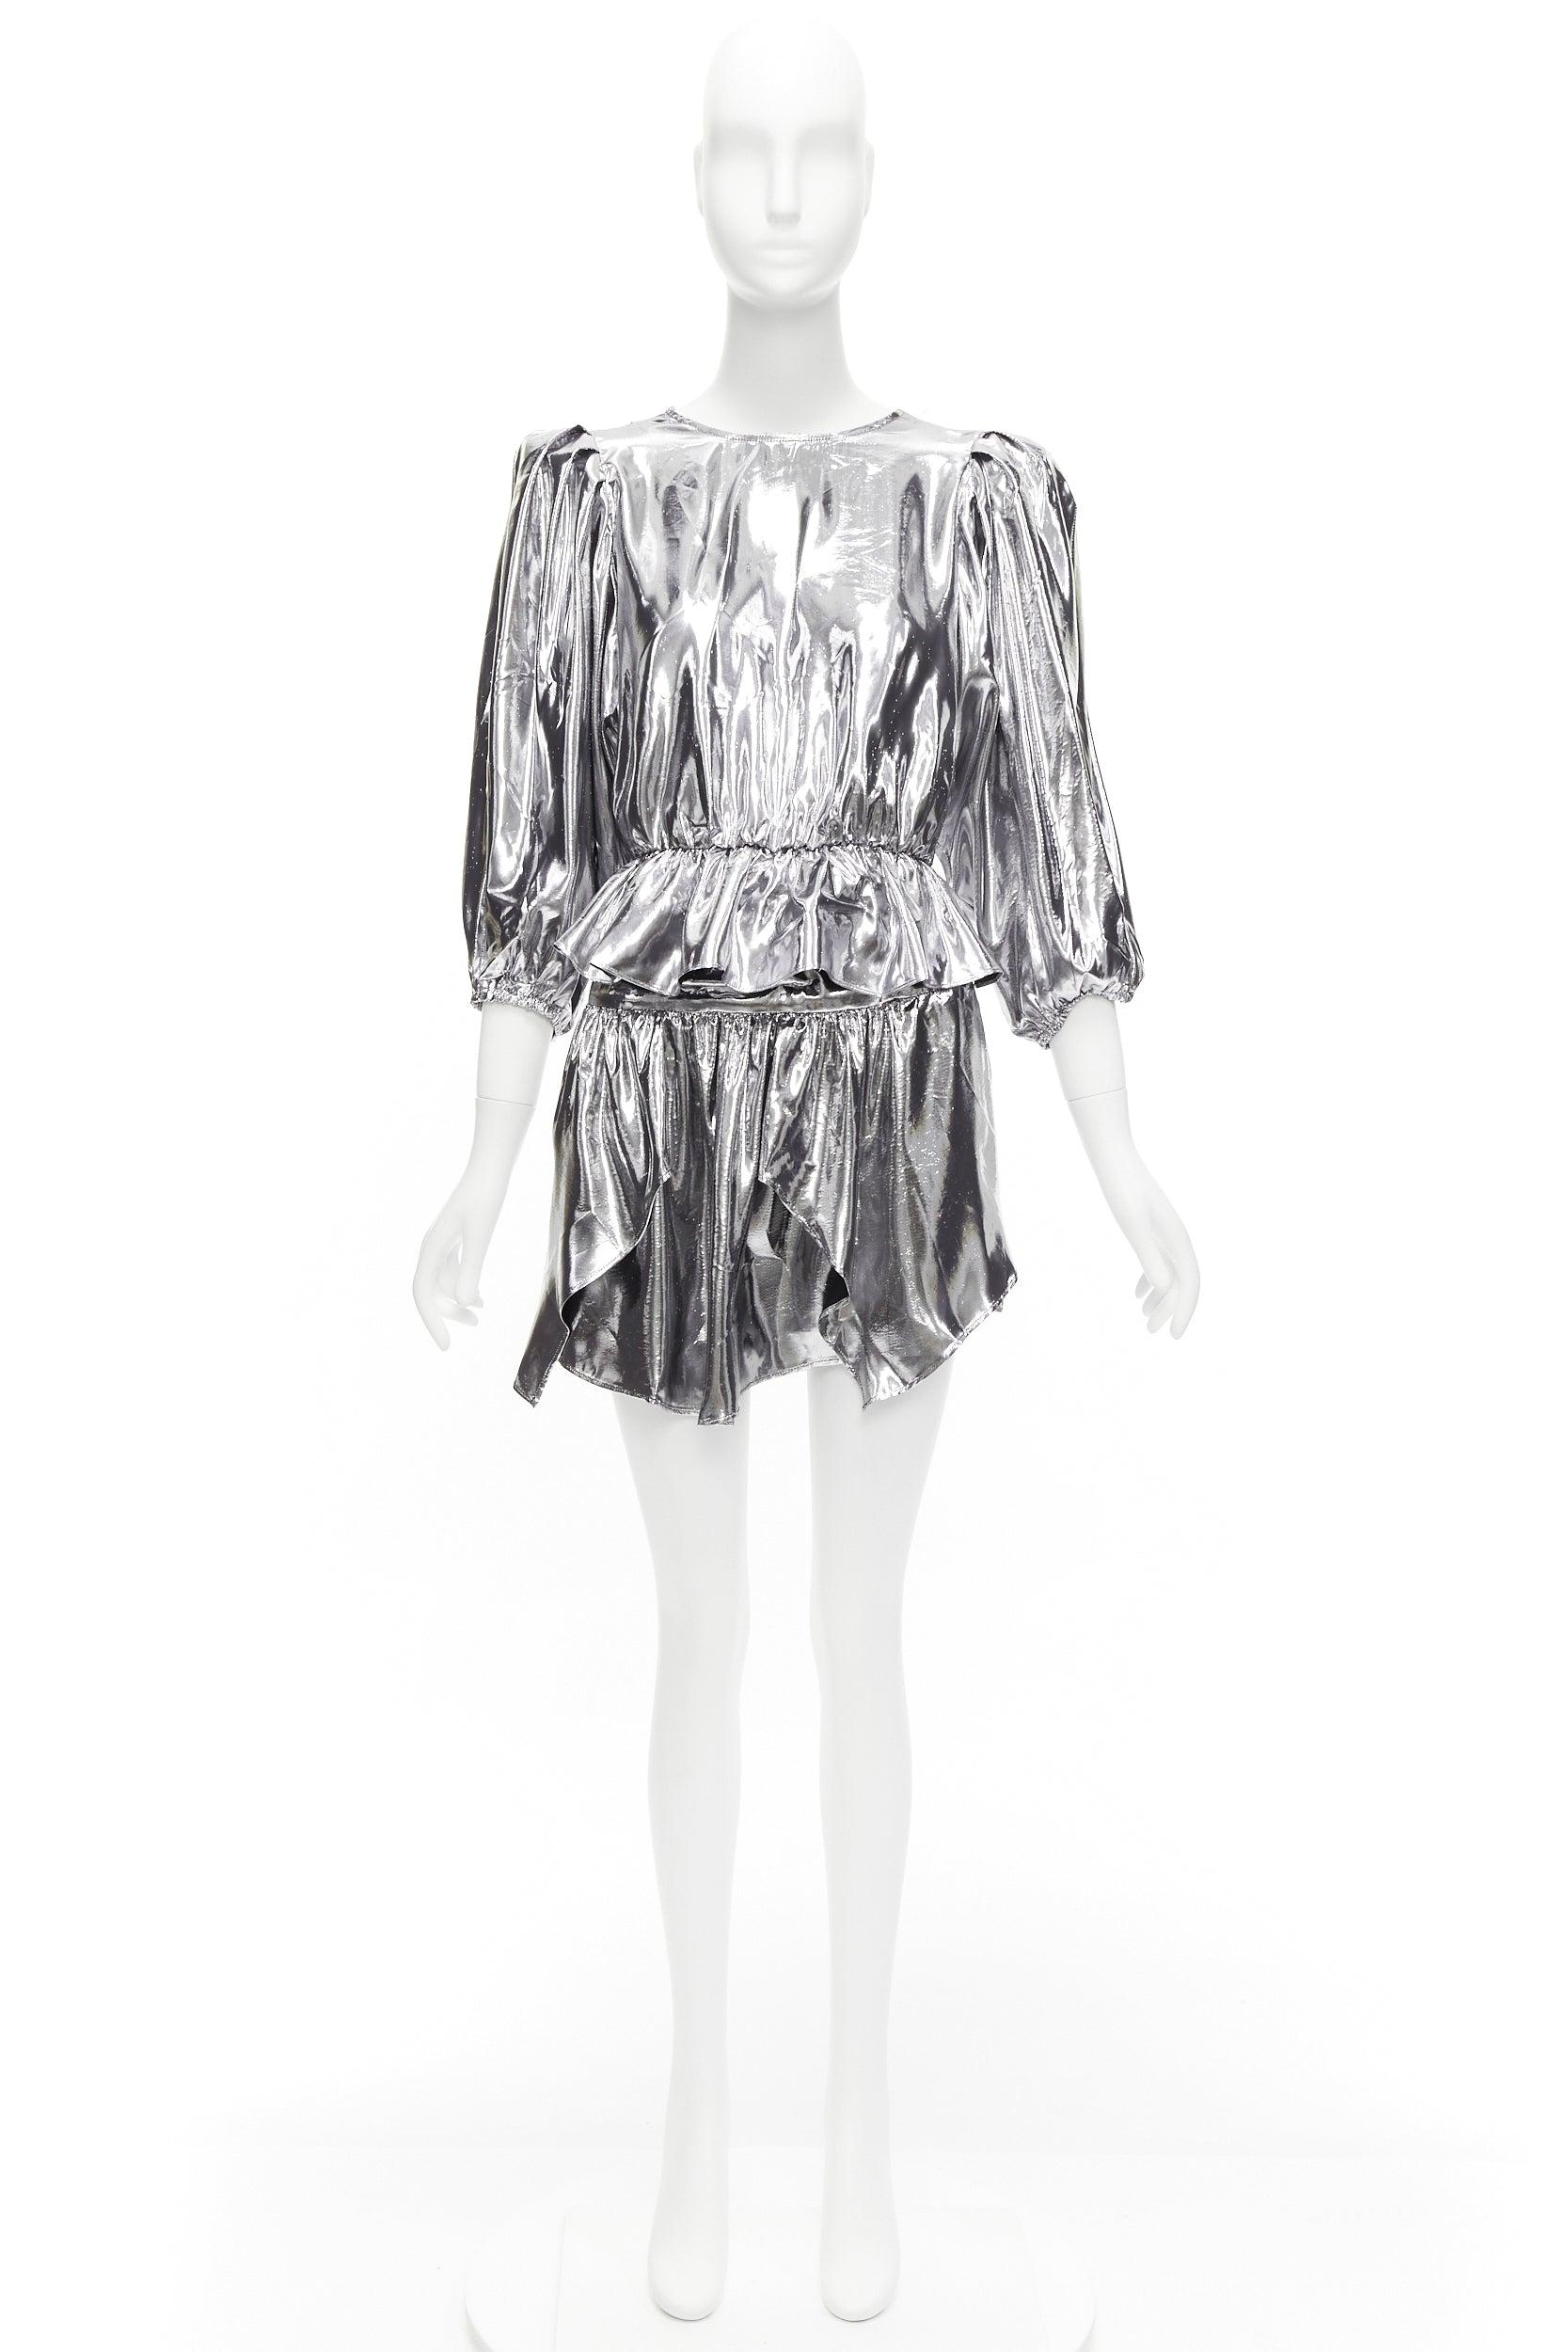 ISABEL MARANT metallic silver silk blend puff sleeve top flare skirt FR34 XS For Sale 9